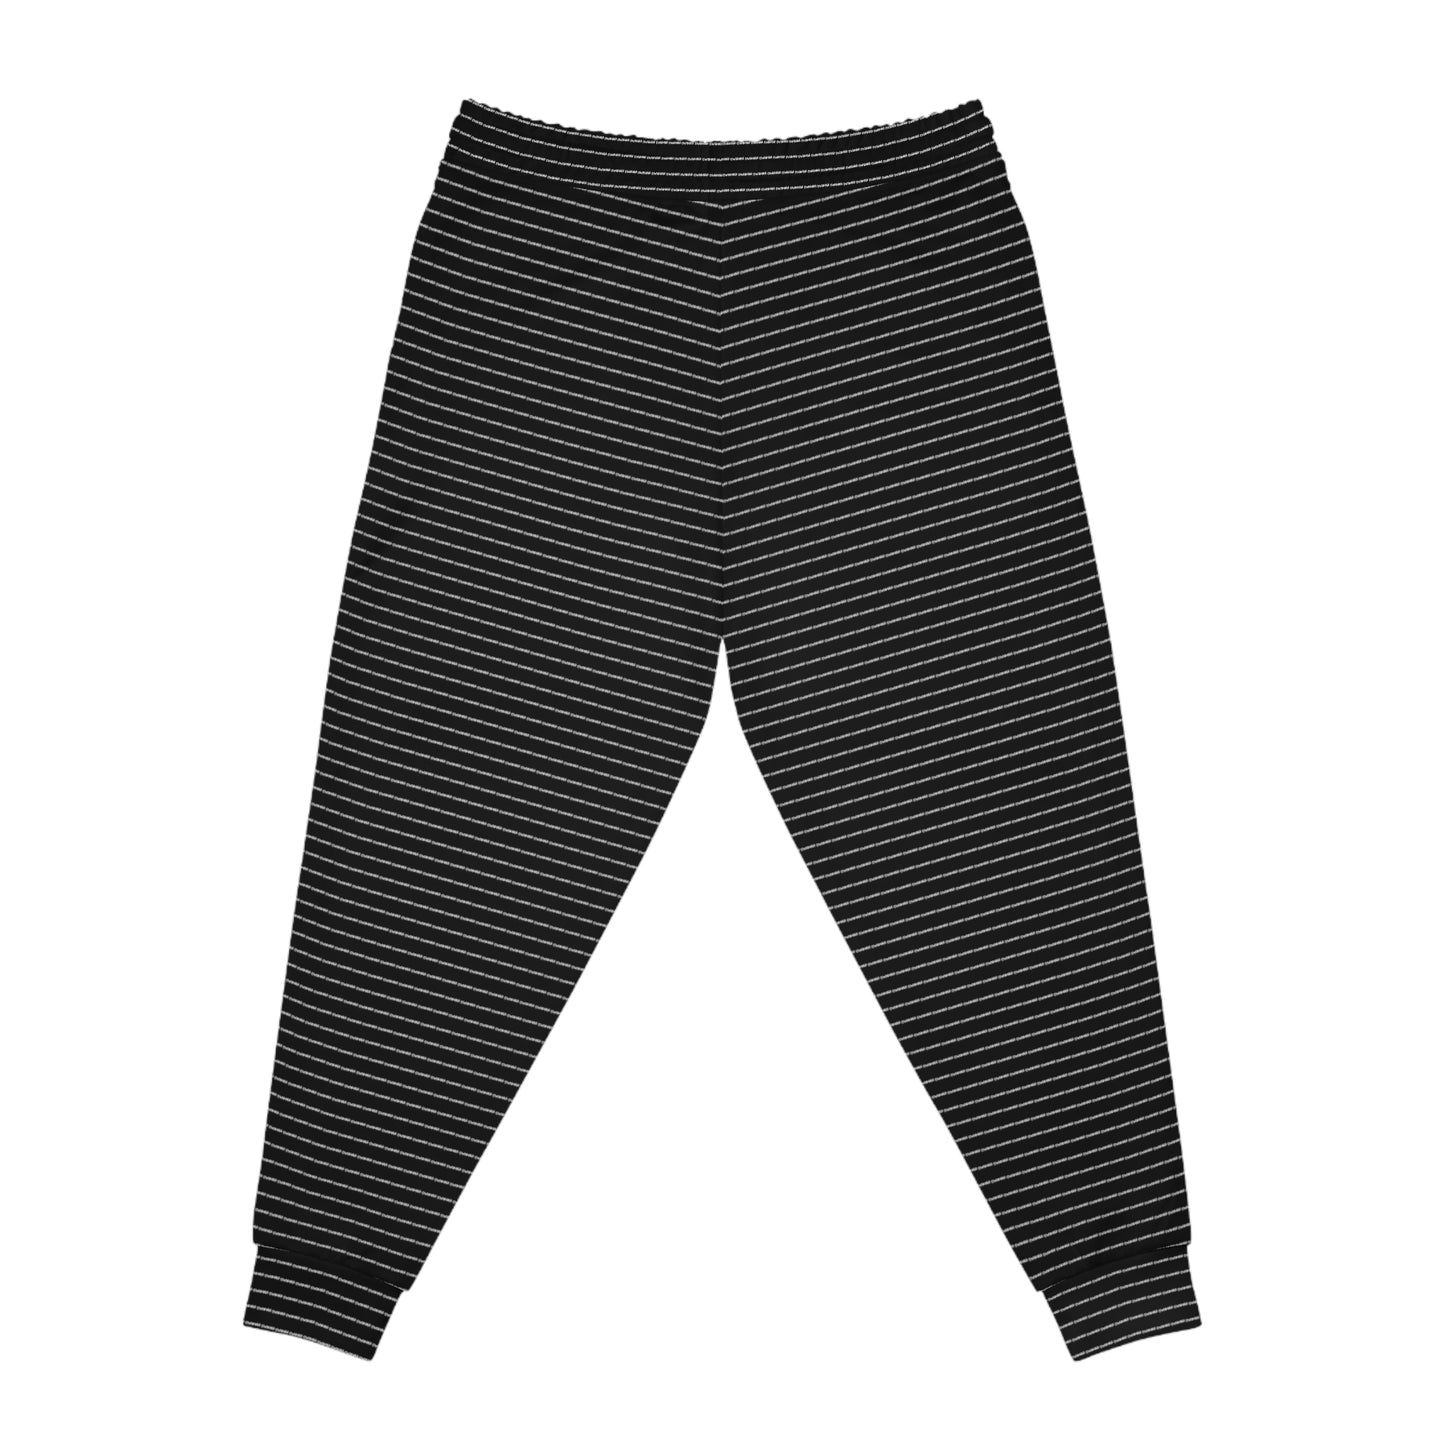 OWN MAN Athletic Joggers